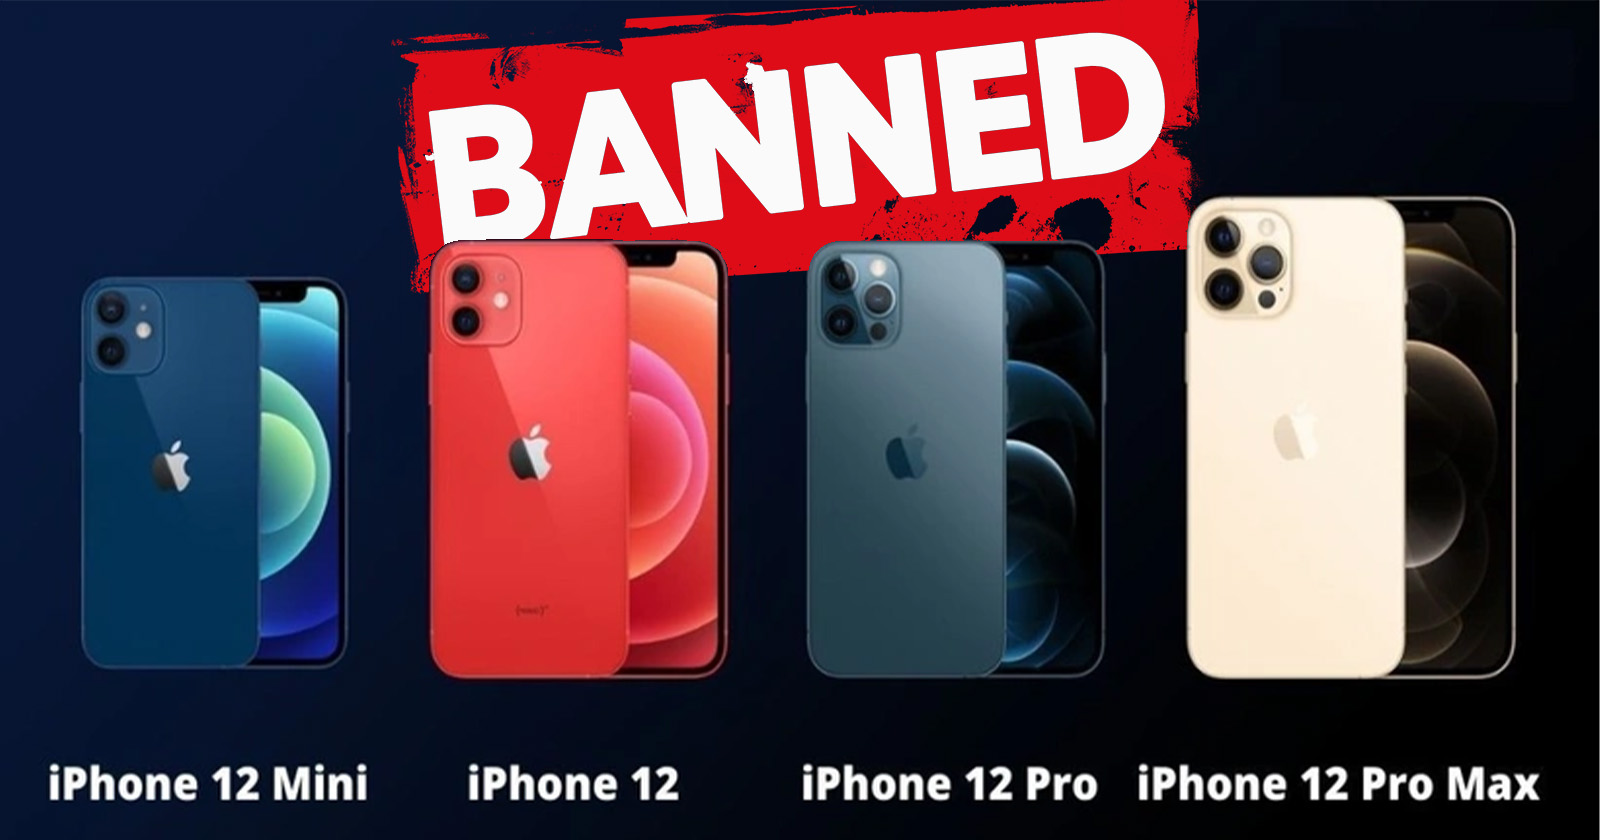 Why has France banned sales of Apple's iPhone 12?